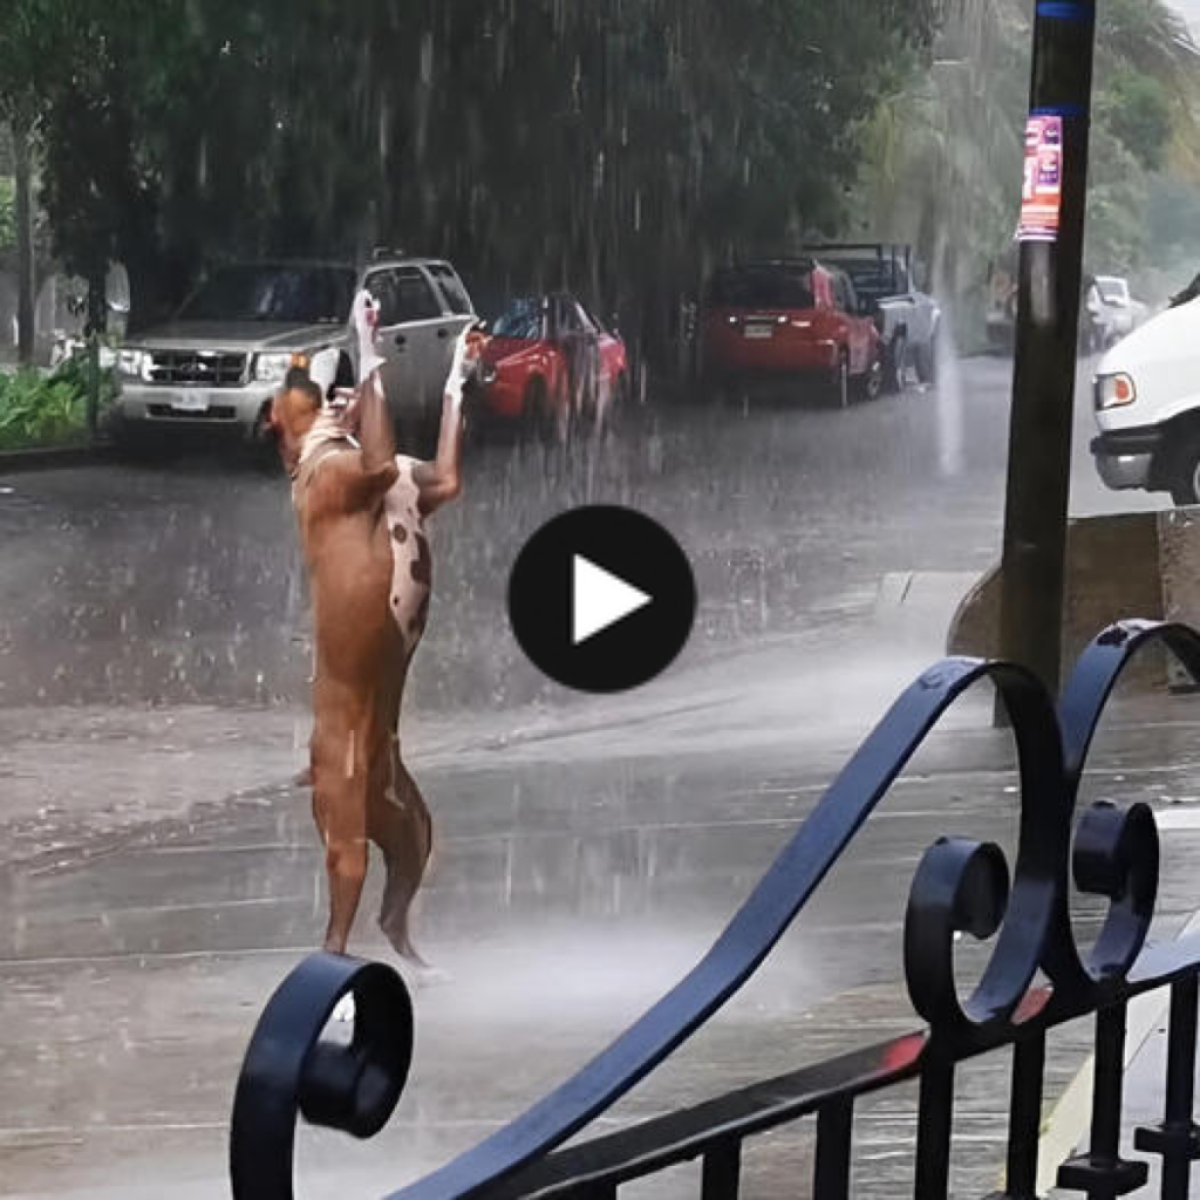 The dog’s innocence and carefree dance gracefully in the rain captivates and energizes viewers.